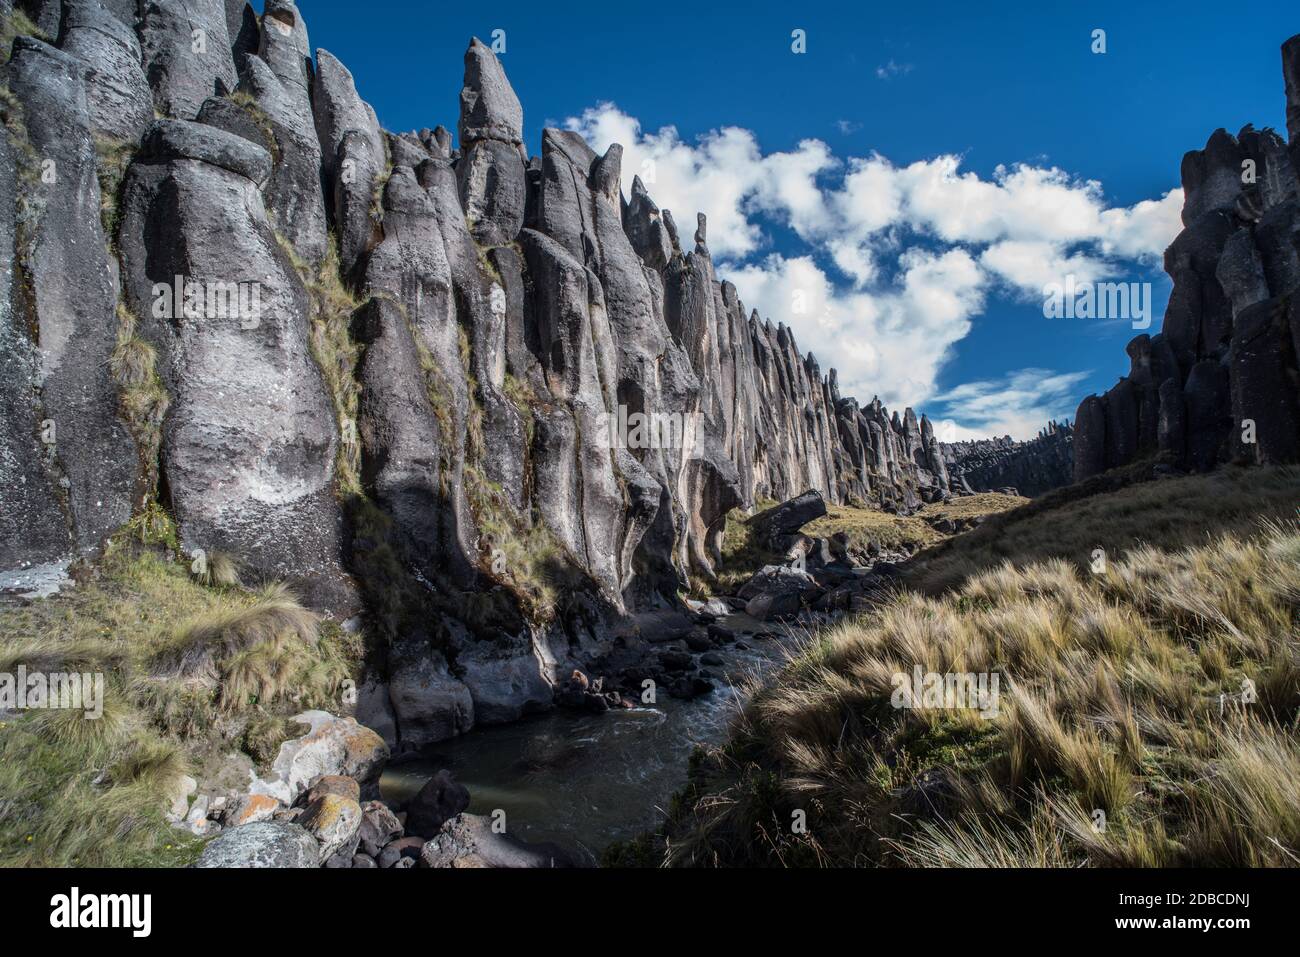 A dramatic and unusual Andean landscape with impressive rock formations high in the Andes mountains. Stock Photo